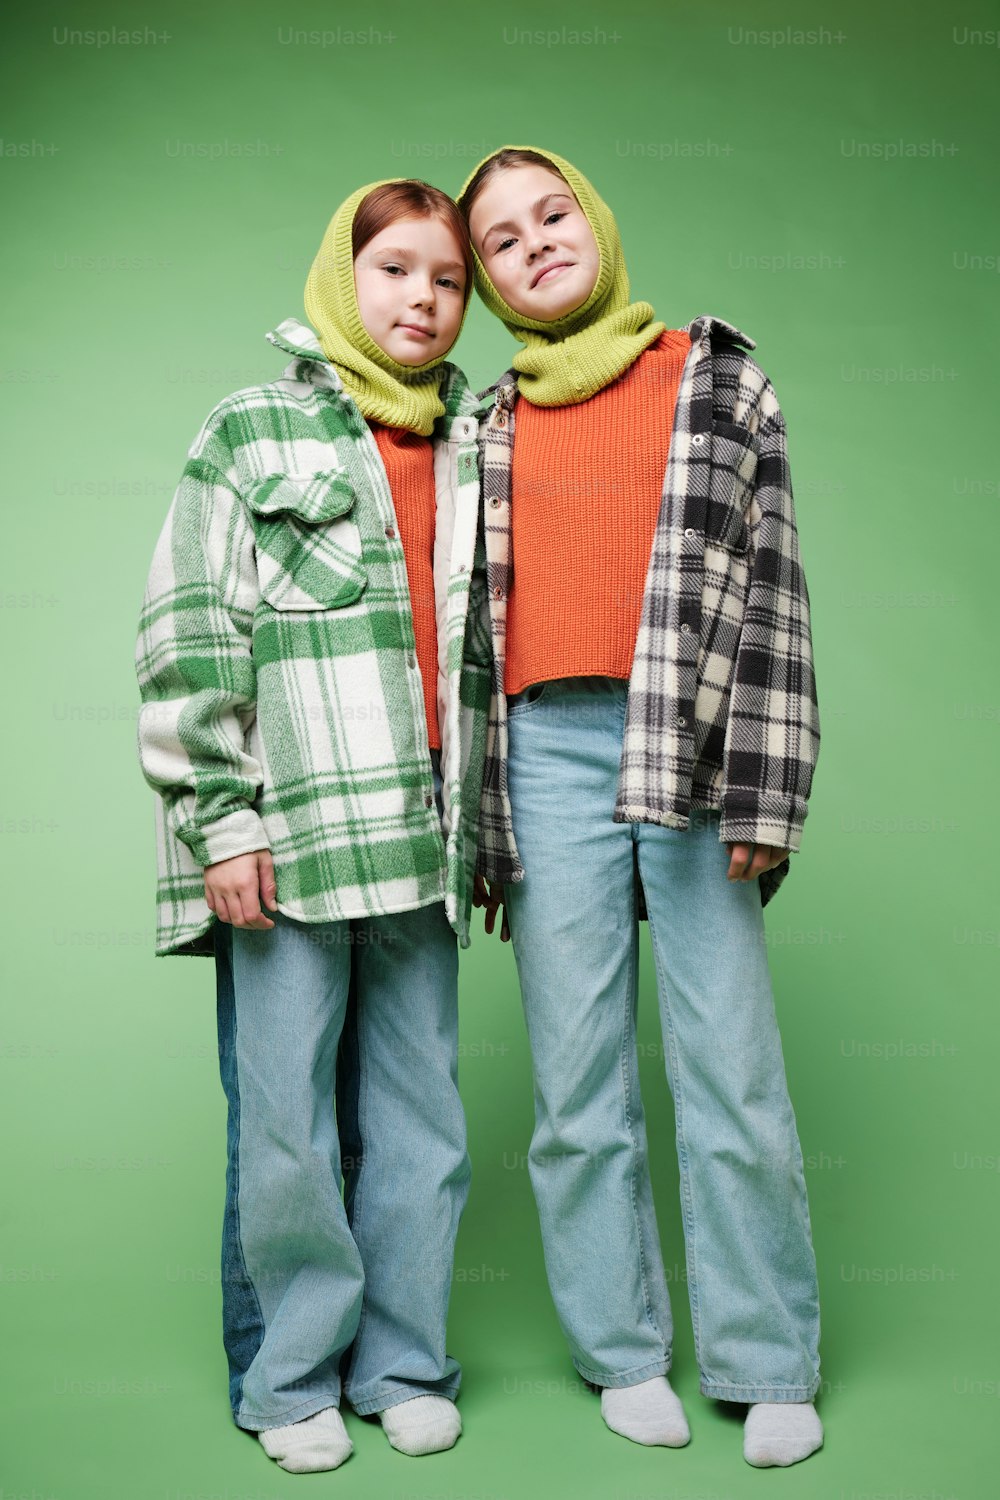 two people standing next to each other in front of a green background